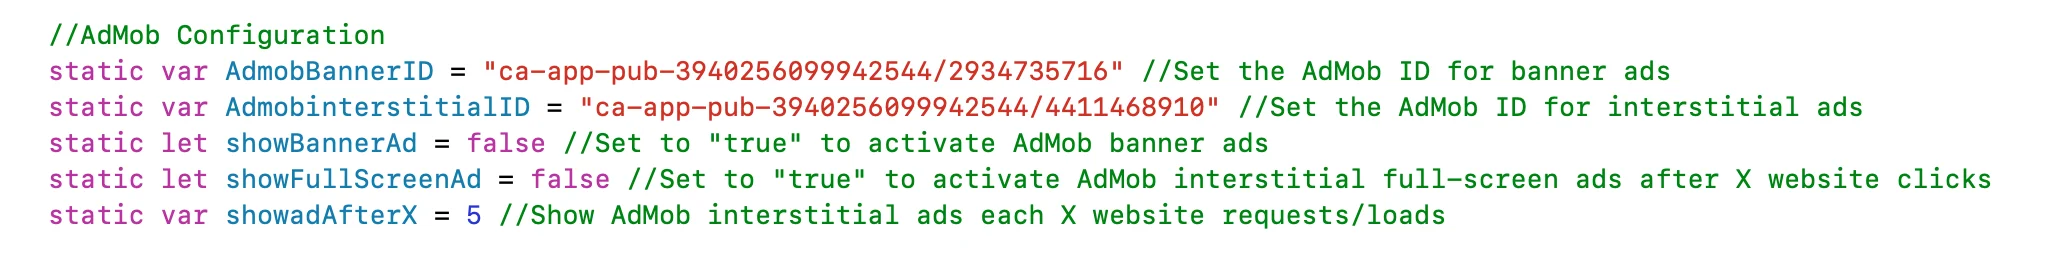 Activate specific AdMob banner blocs into your application